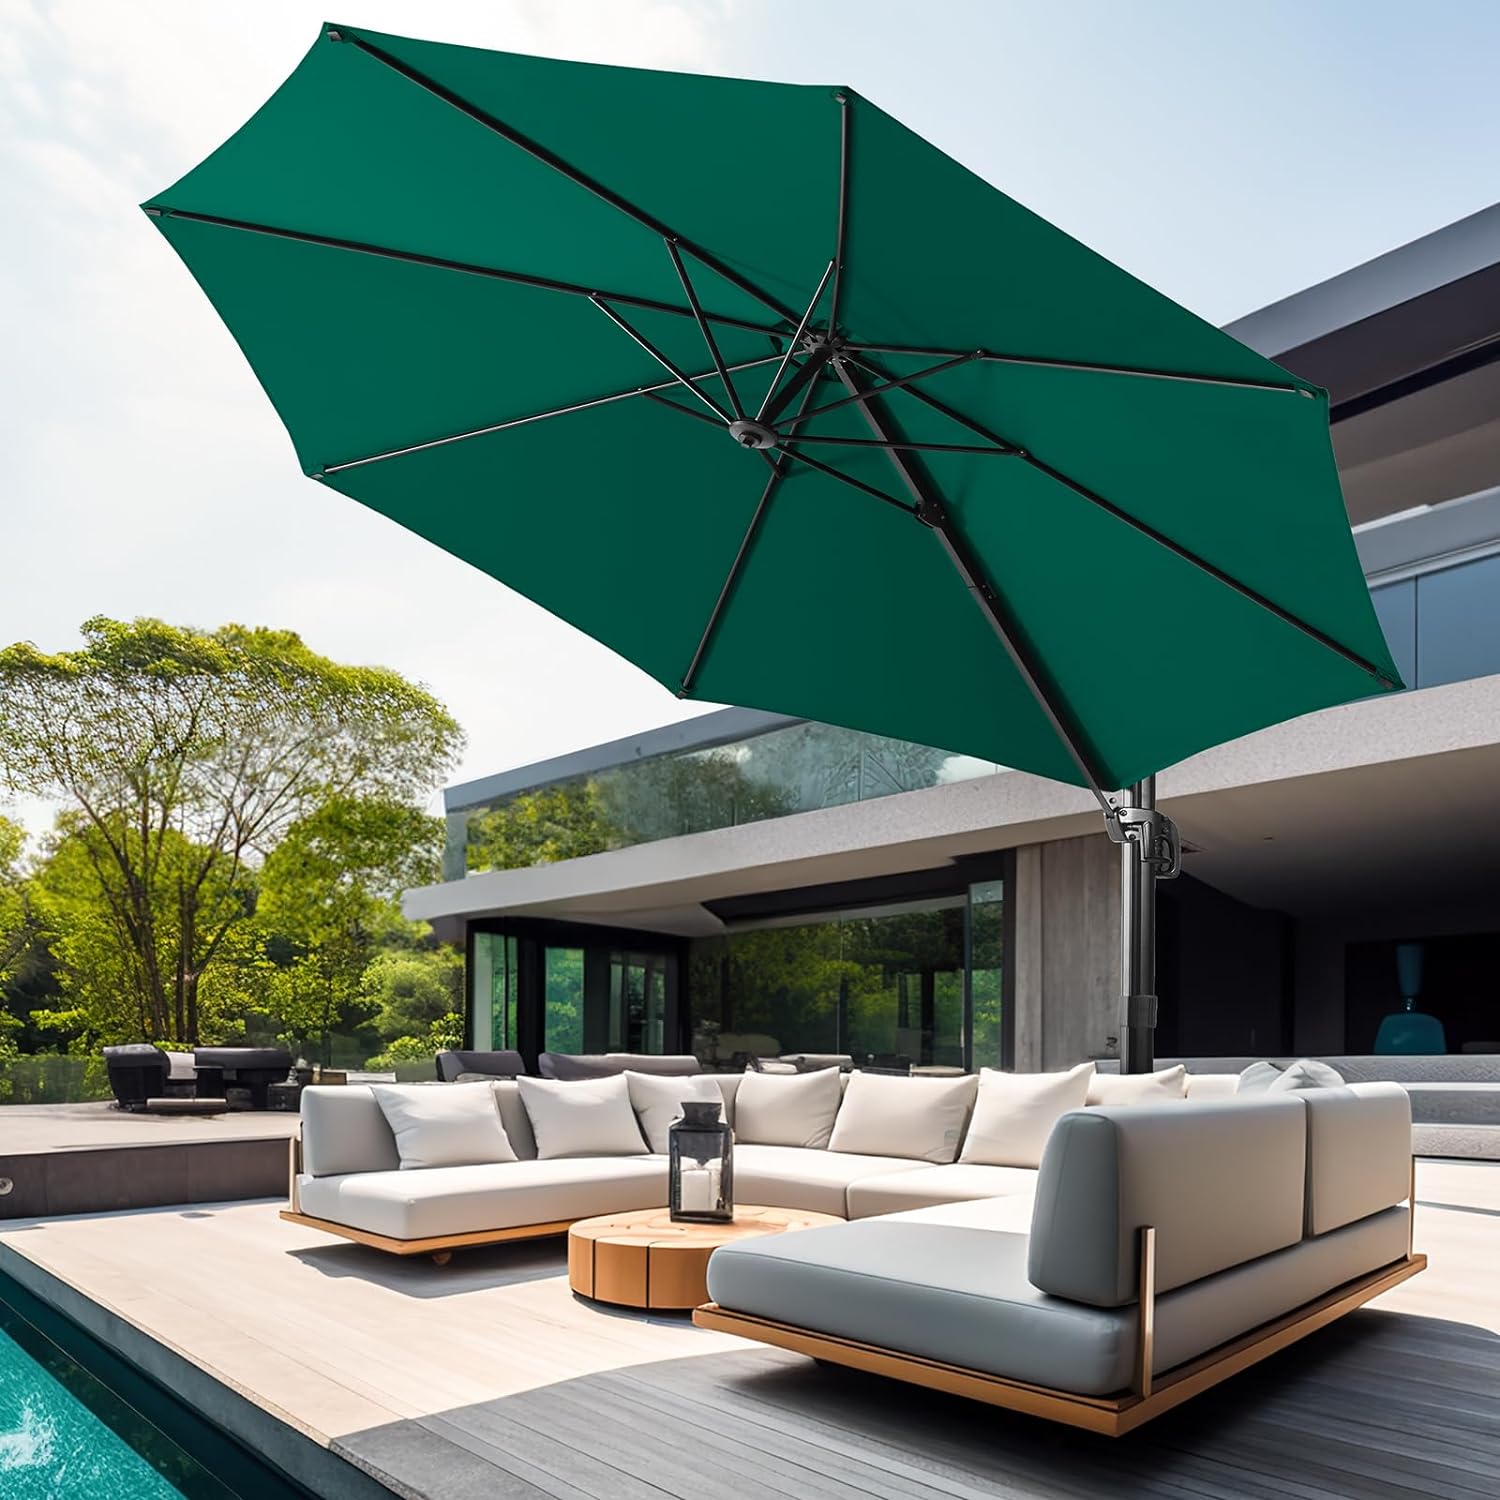 wikiwiki S Series Cantilever Patio Umbrellas 10 FT Outdoor Offset Umbrella/Fade & UV Resistant Solution-dyed Fabric, 5 Level 360 Rotation Aluminum Pole for Deck Pool Backyard Garden, Dark Green